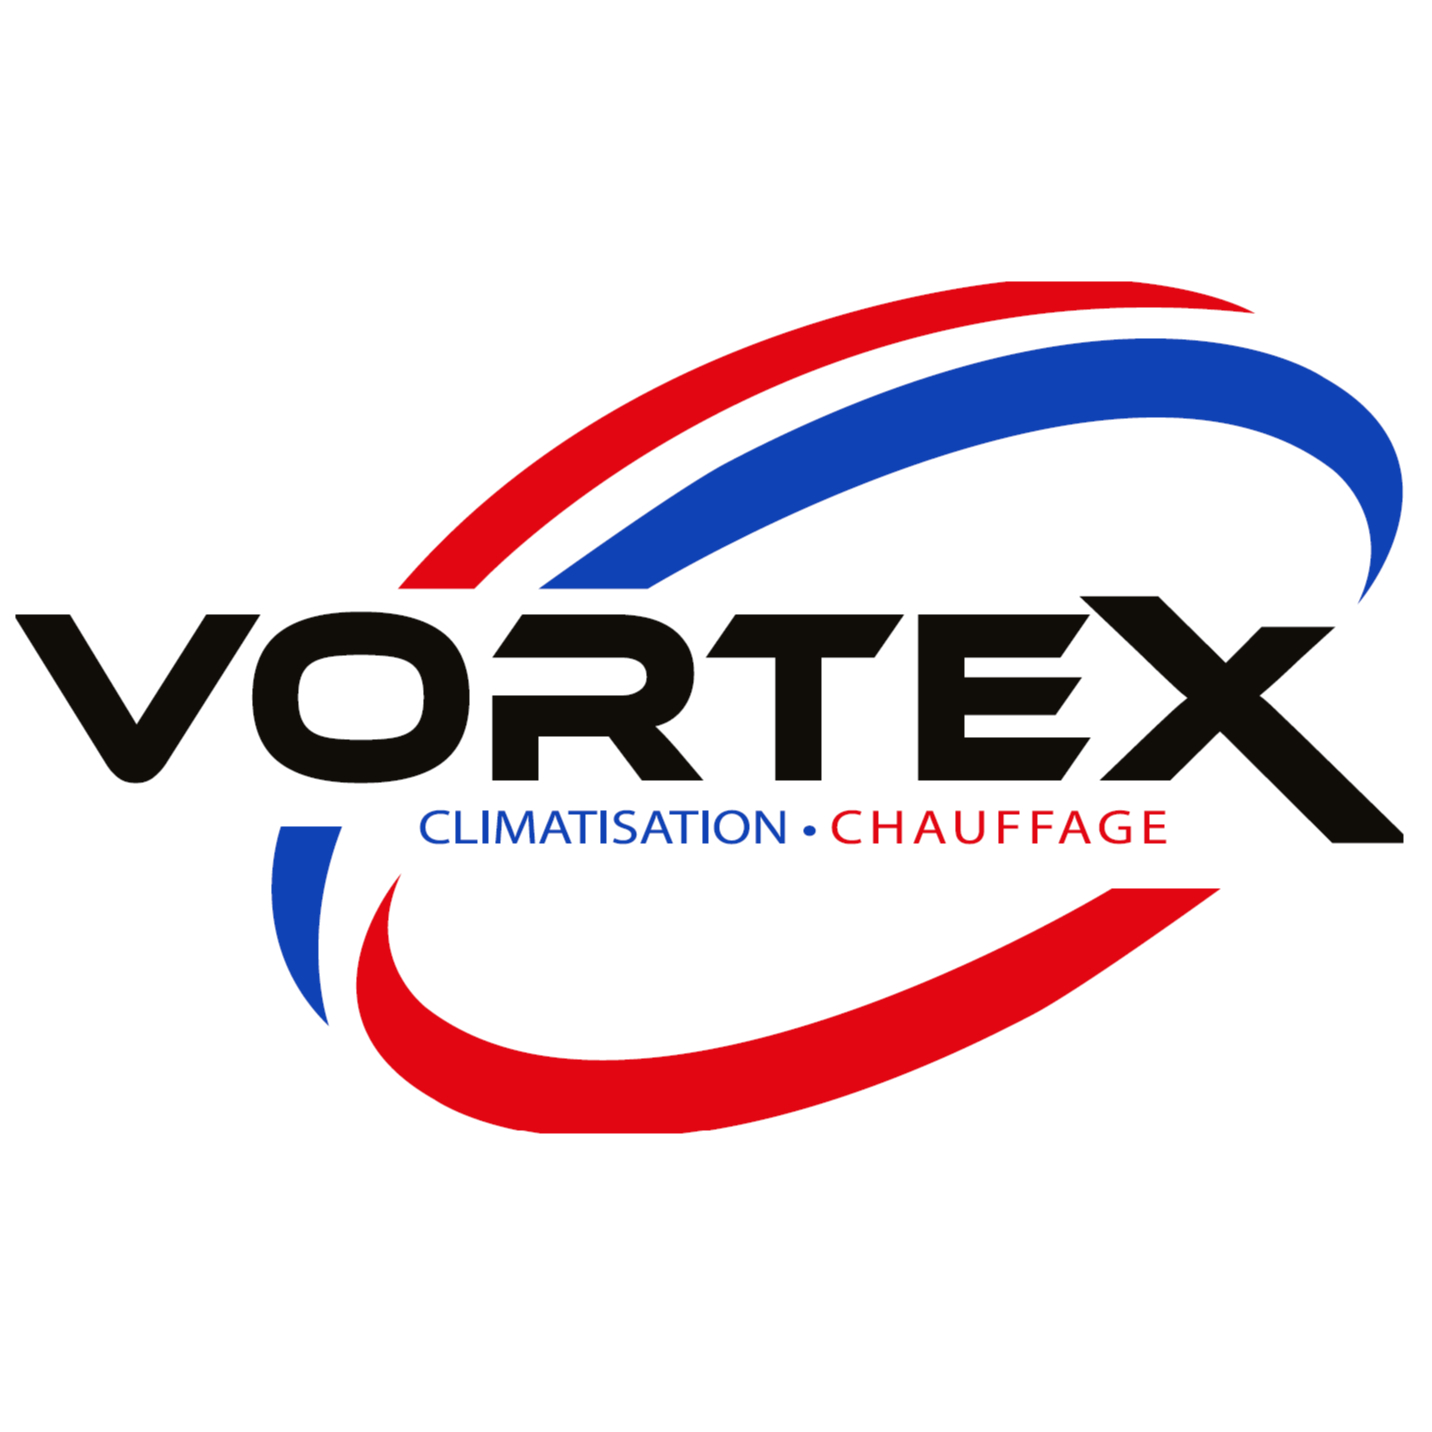 Vortex Climatisation - Installation Chauffage, Thermopompe, Air climatisé, Climatiseur - Heating Contractors